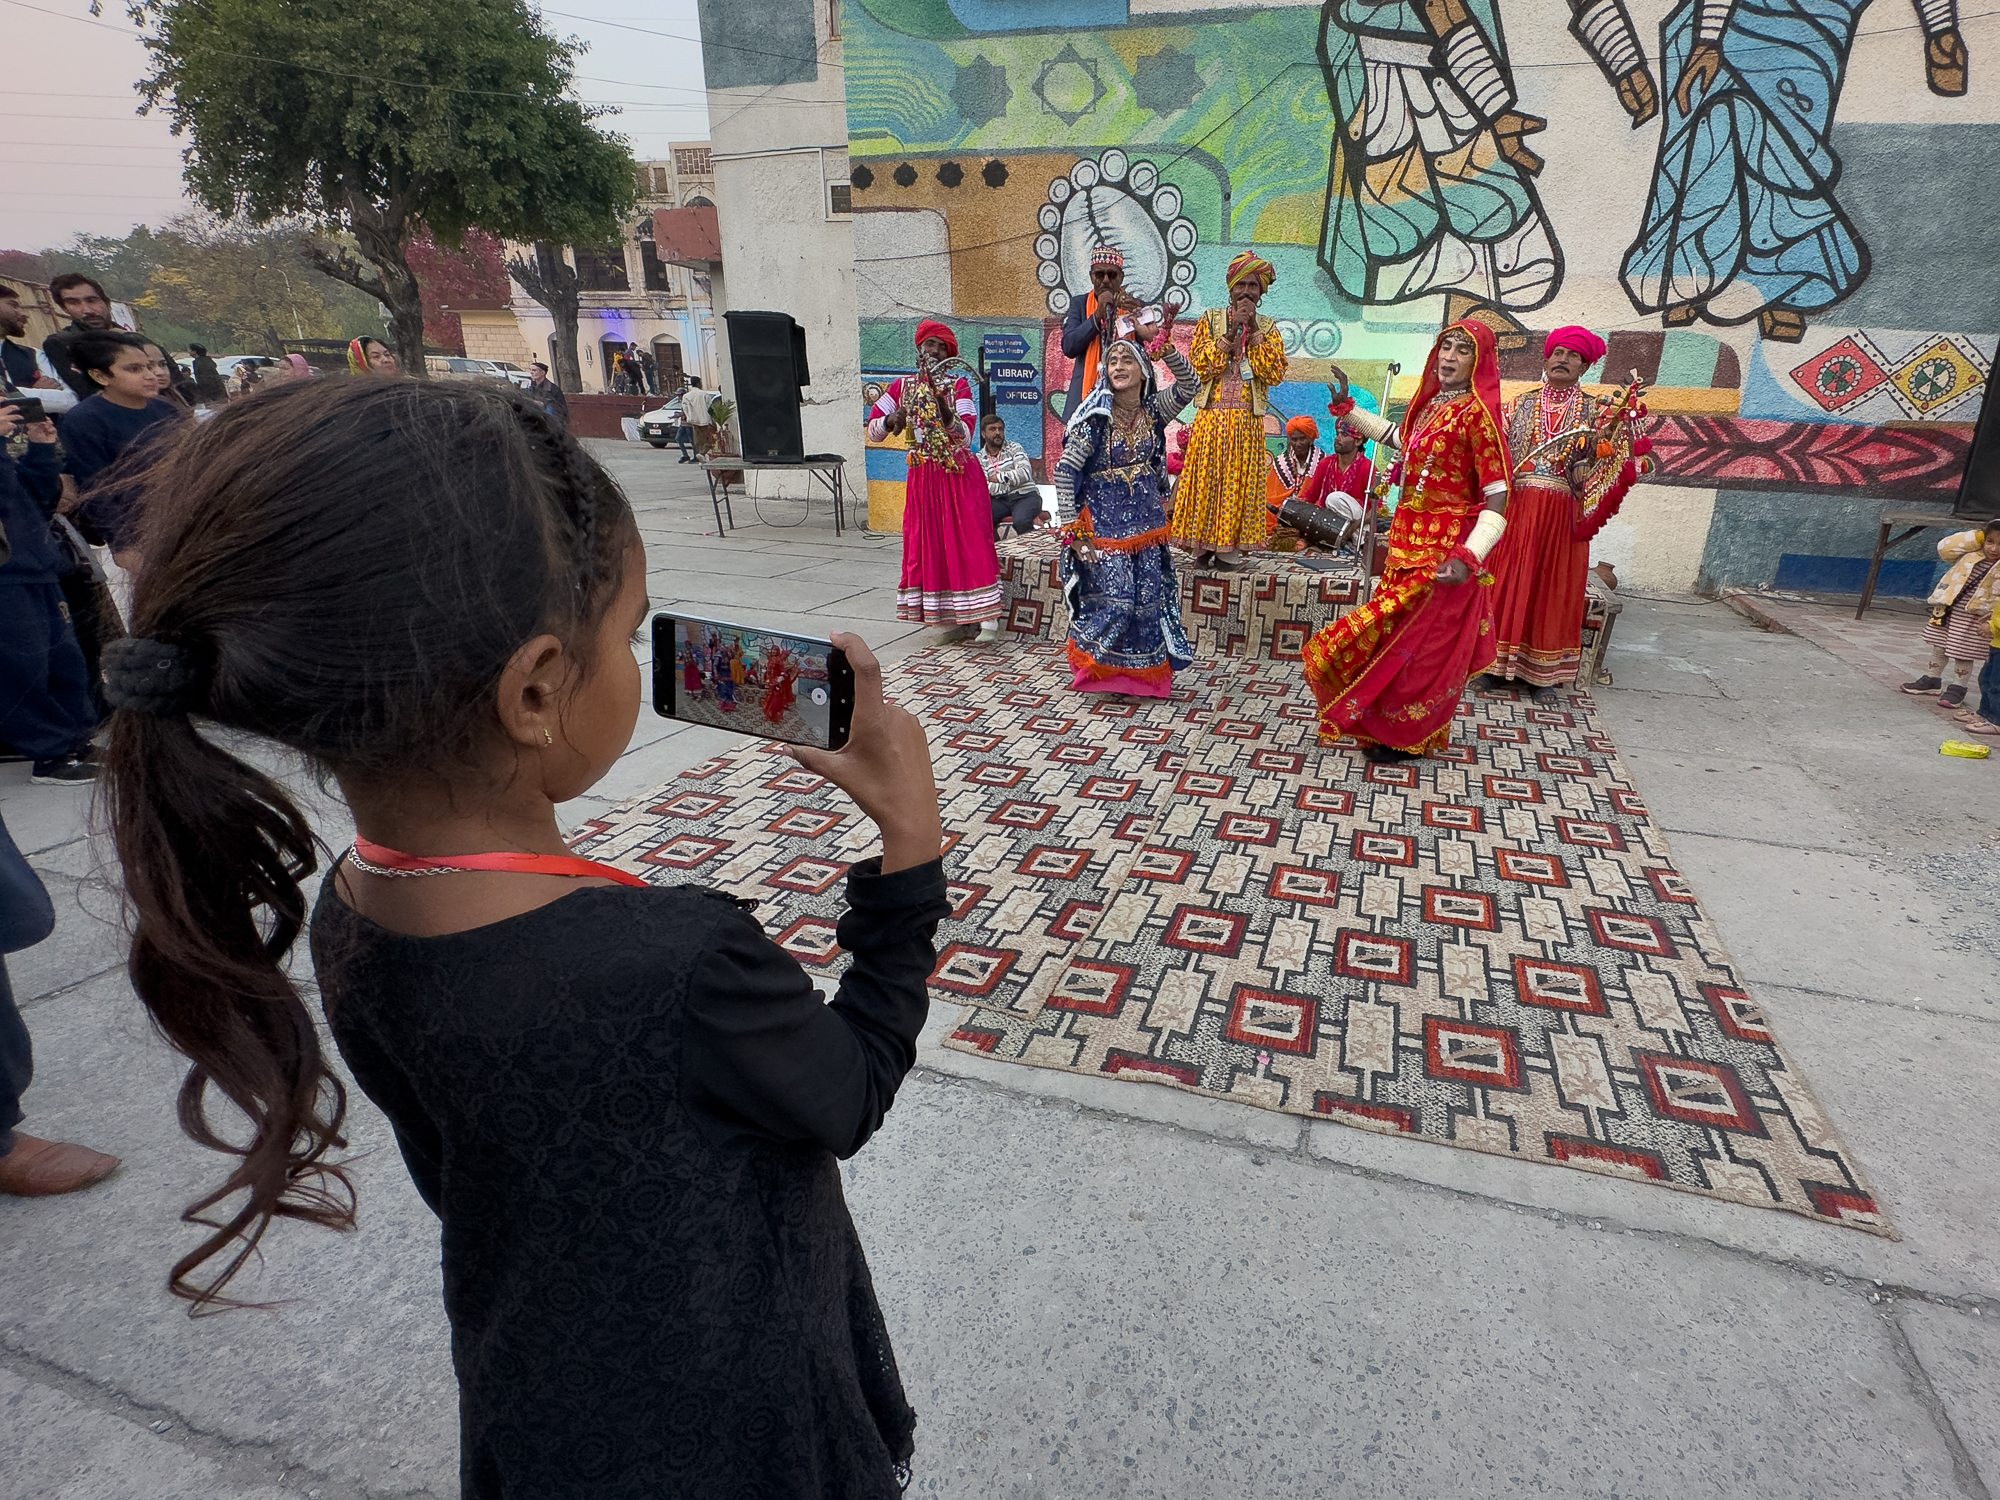 Young Pakistani girl using a phone to make a video of dancers and musicians from the Sindh region at the Lok Mela Festival in Islamabad, Pakistan.